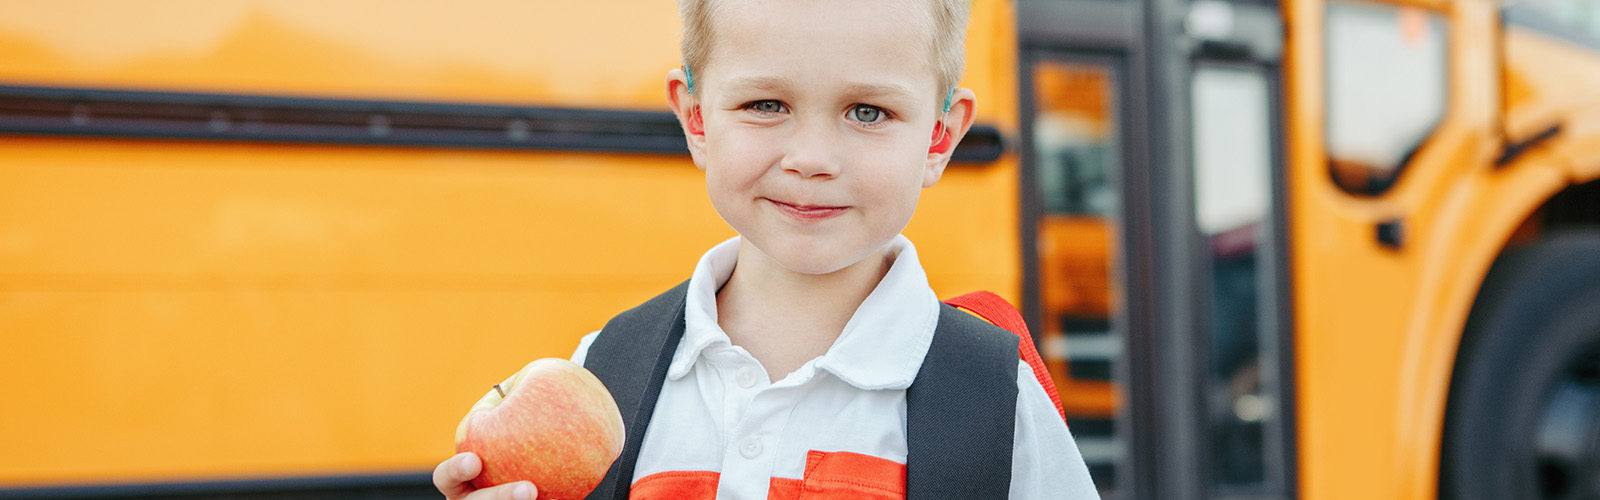 boy with apple standing in front of school bus